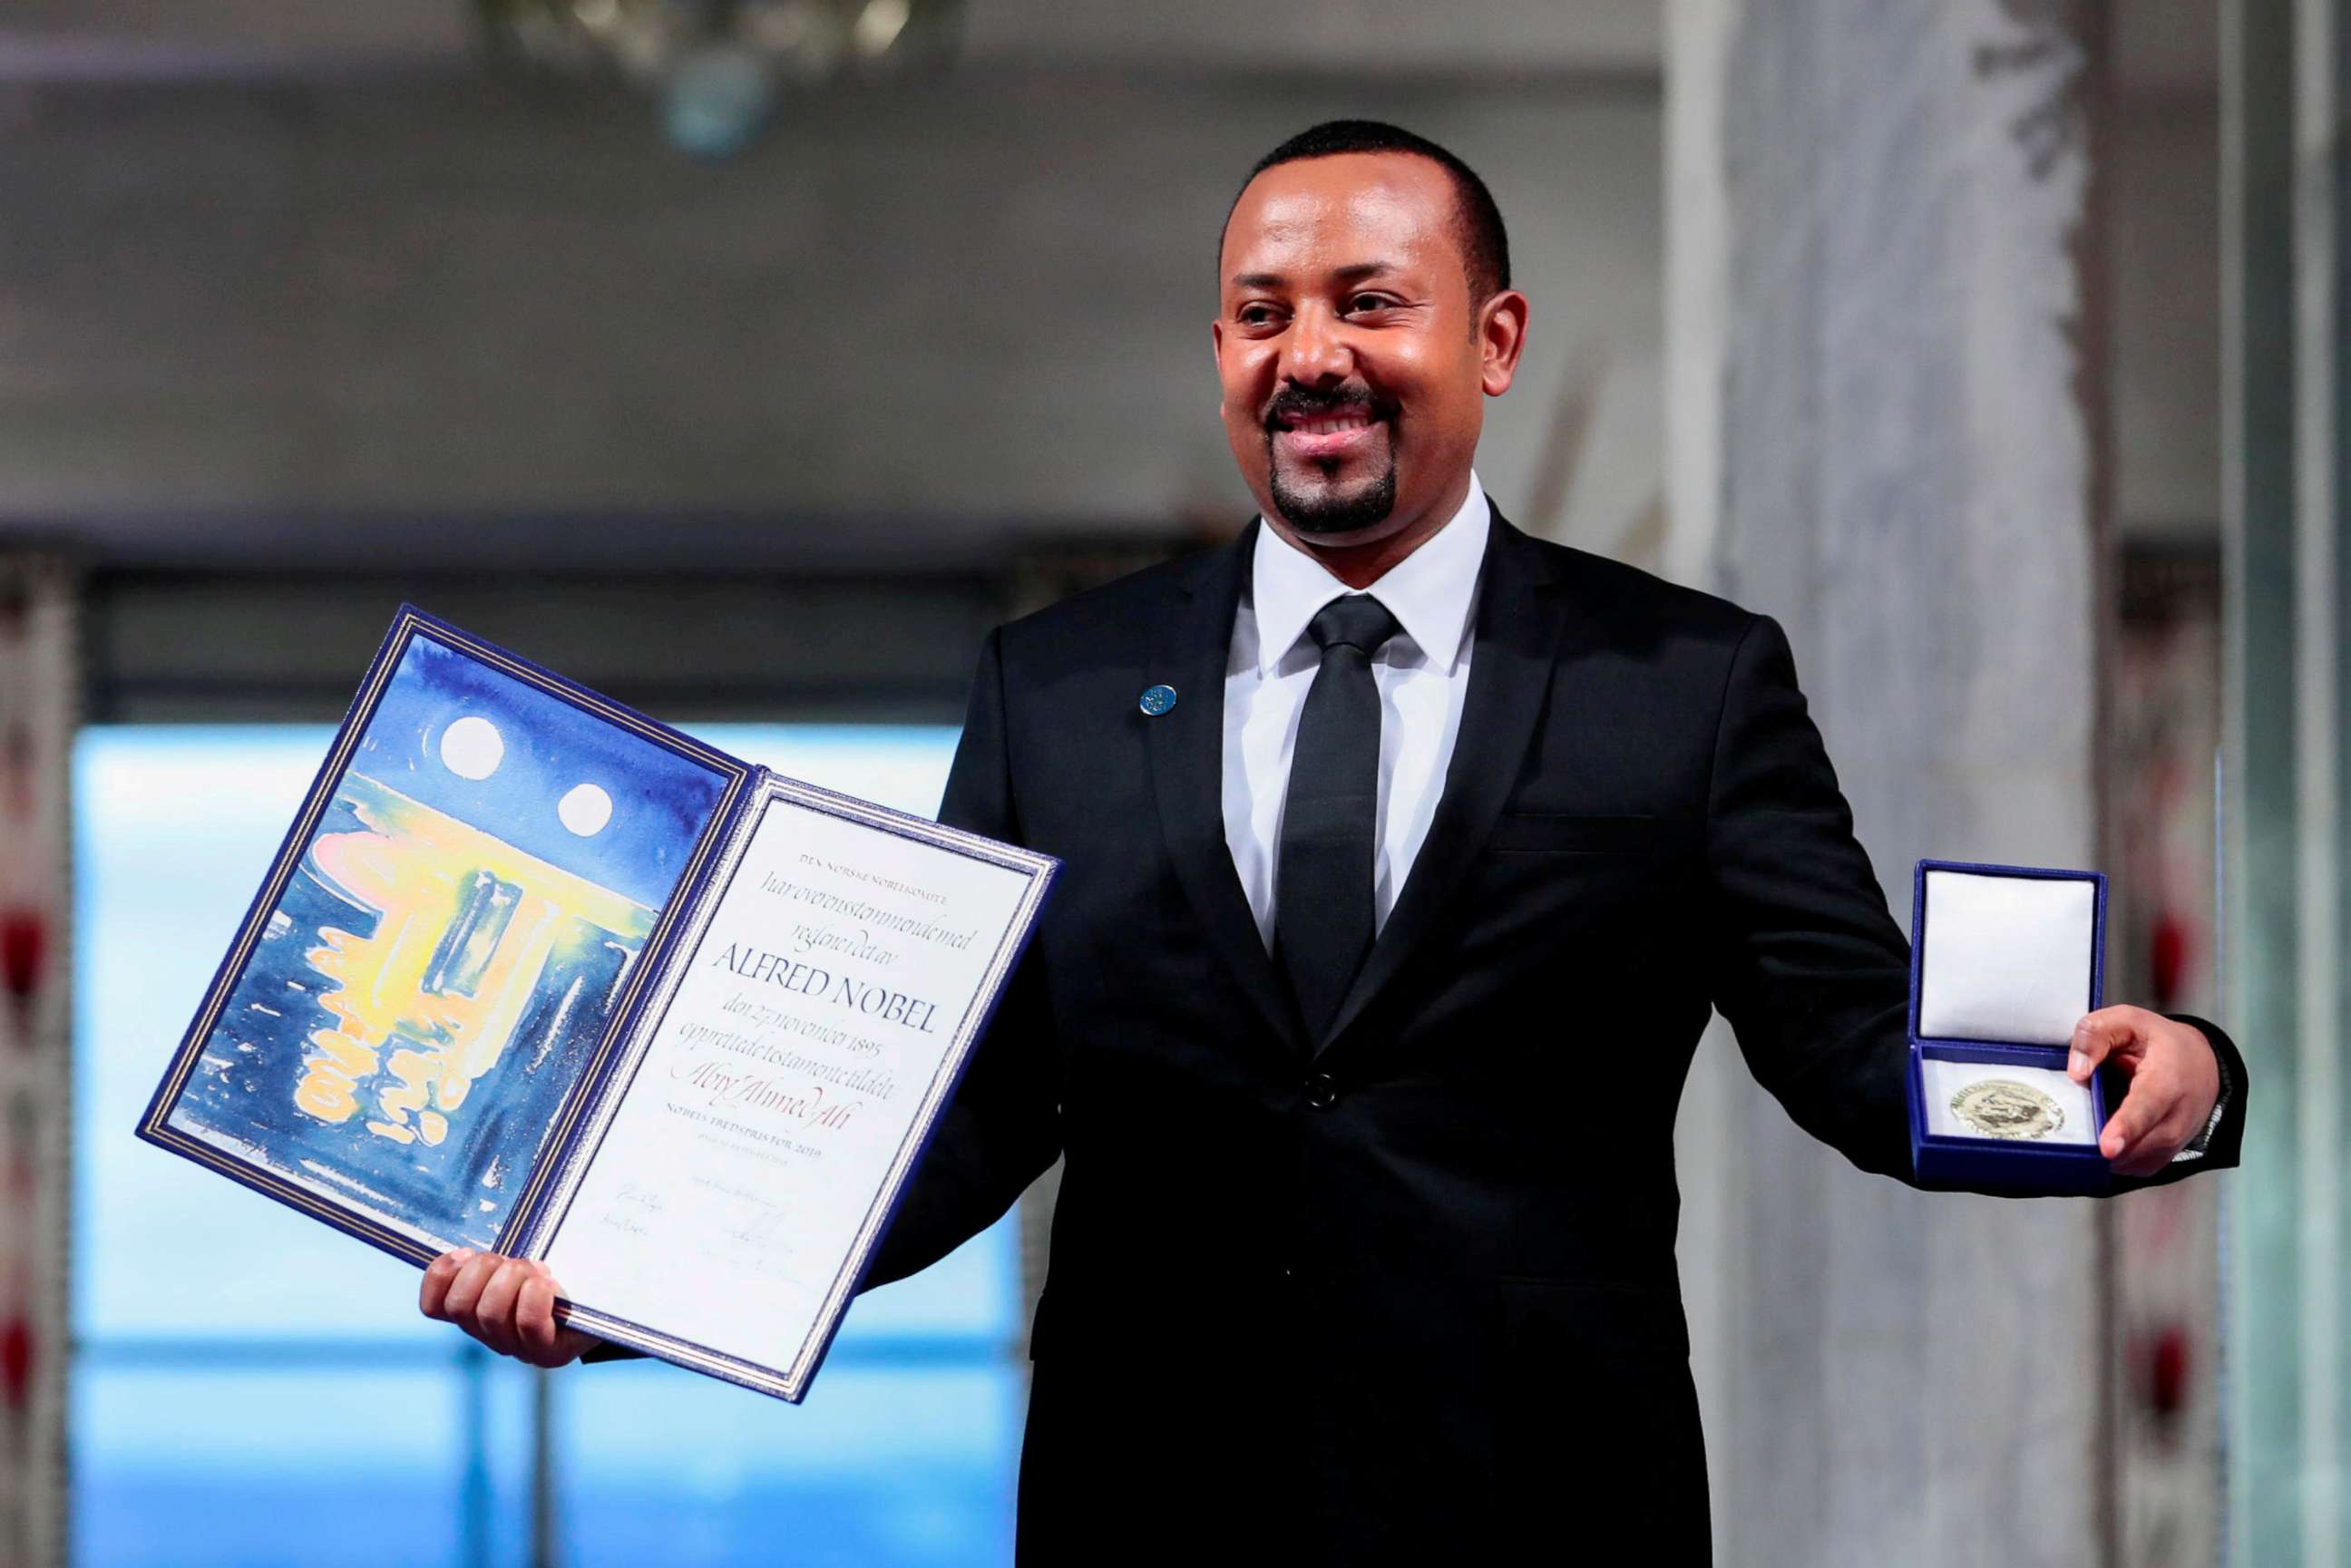 PHOTO: Ethiopian Prime Minister Abiy Ahmed Ali poses with medal and diploma after receiving Nobel Peace Prize during ceremony in Oslo City Hall, Norway, Dec. 10, 2019.